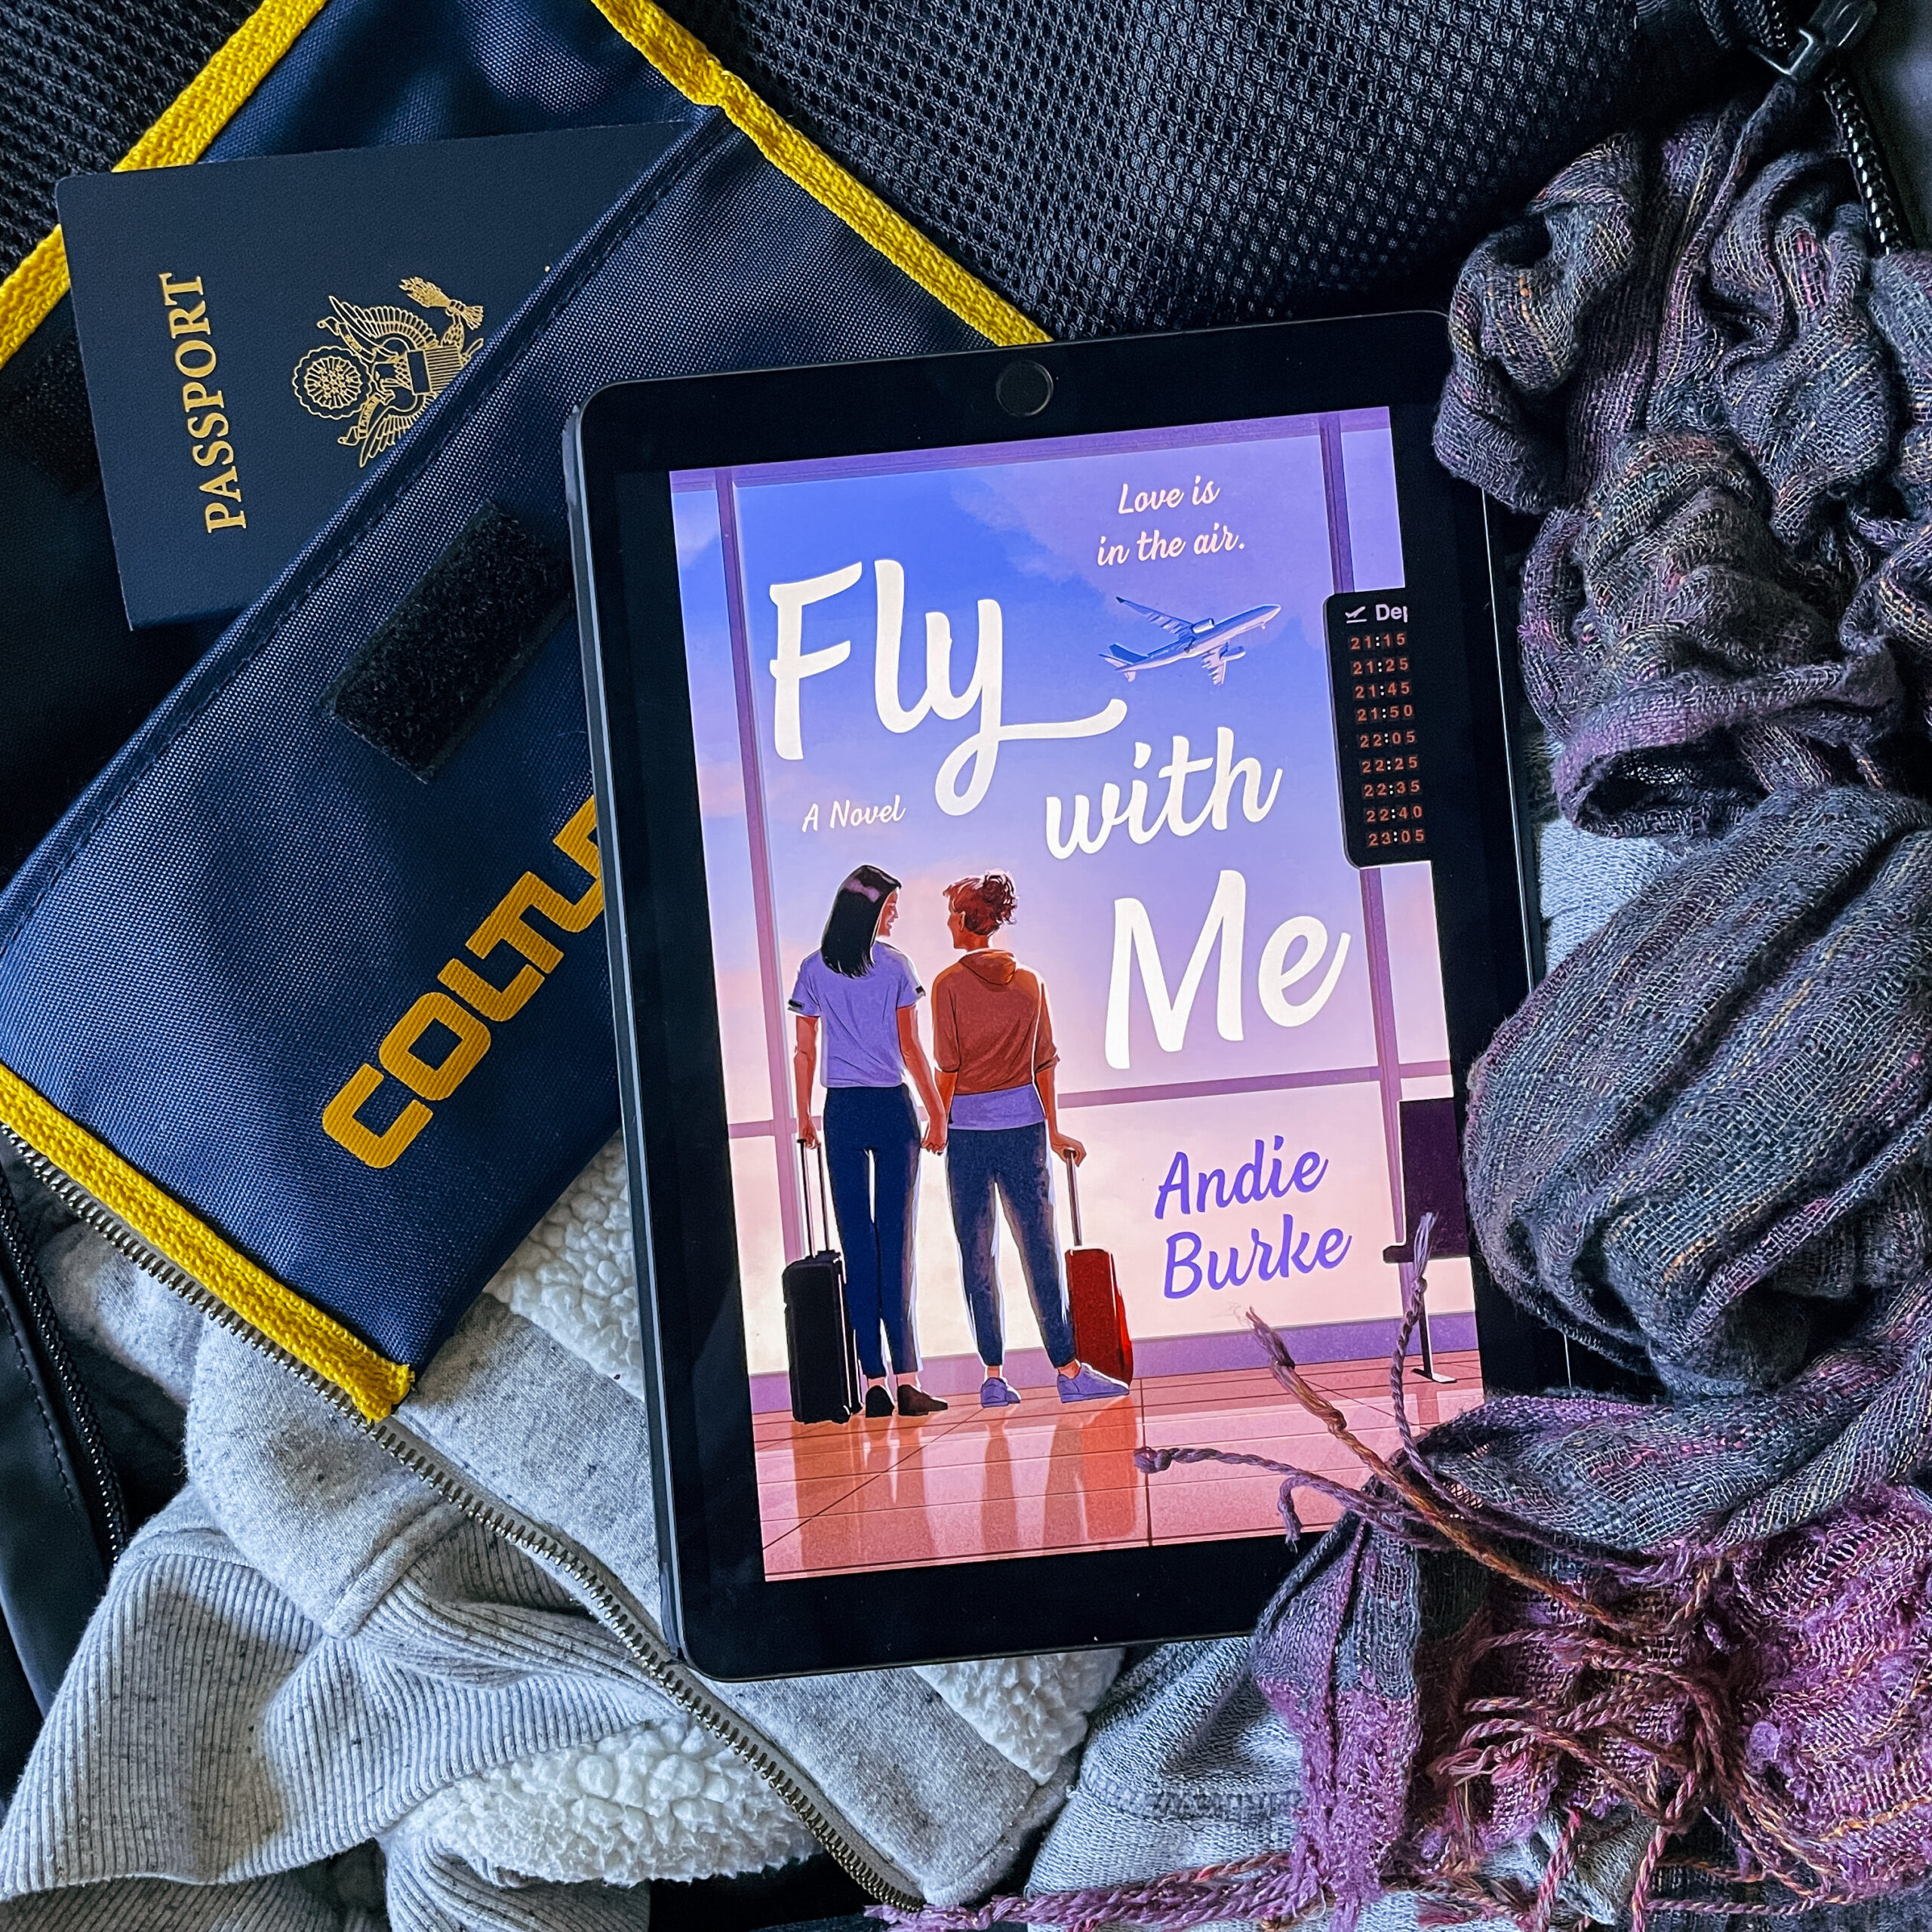 Photo of an ipad with the ebook cover of Fly With Me by Andie Burke displayed on the screen. The ipad is on top of an open suitcase, in which we can see clothes and a passport.